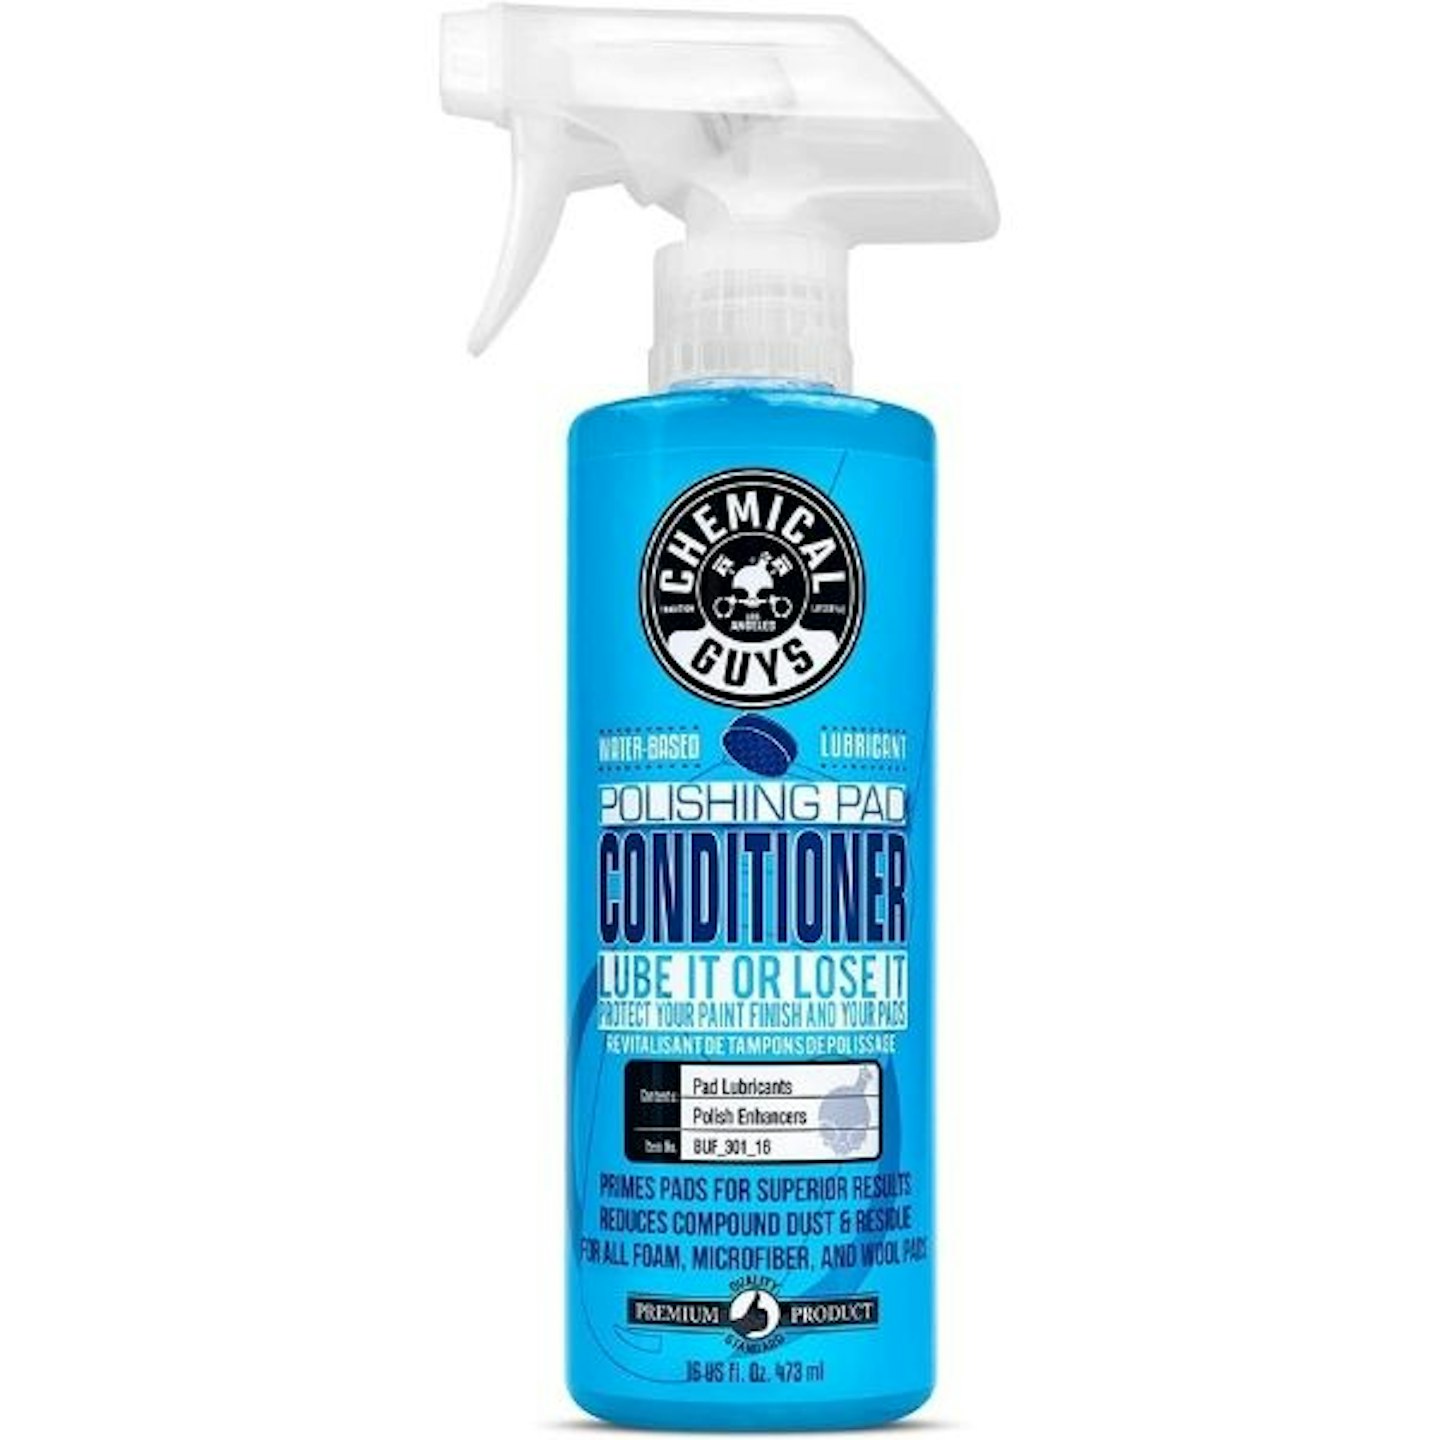 Chemical Guys Polishing/Buffing Pad Conditioner